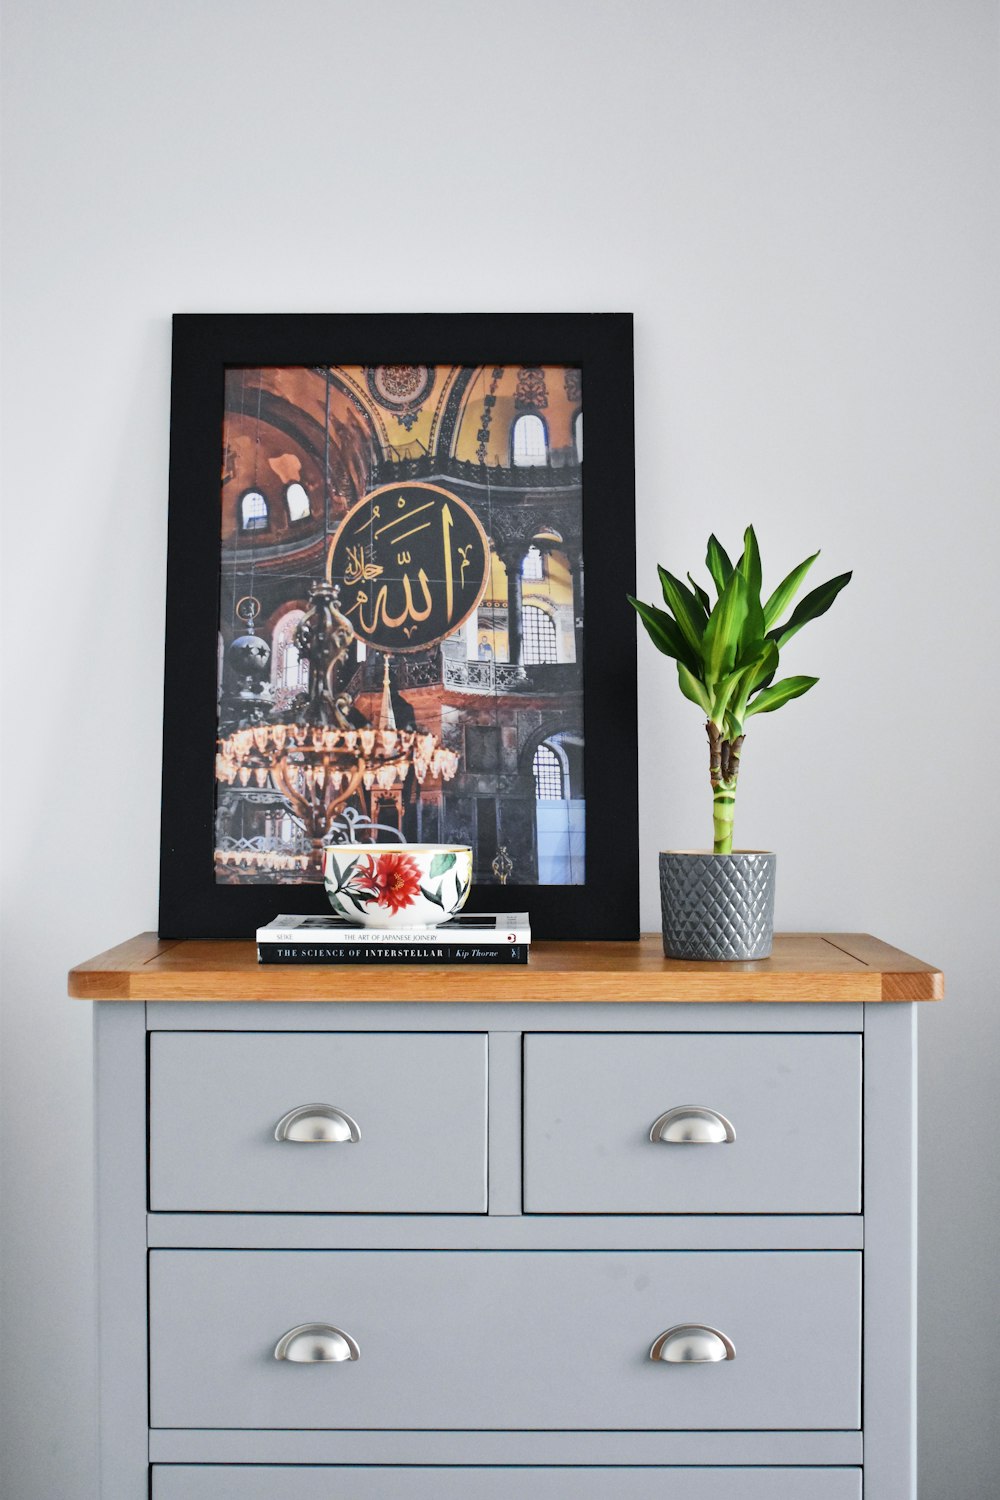 framed photo on wooden dresser with potted plant